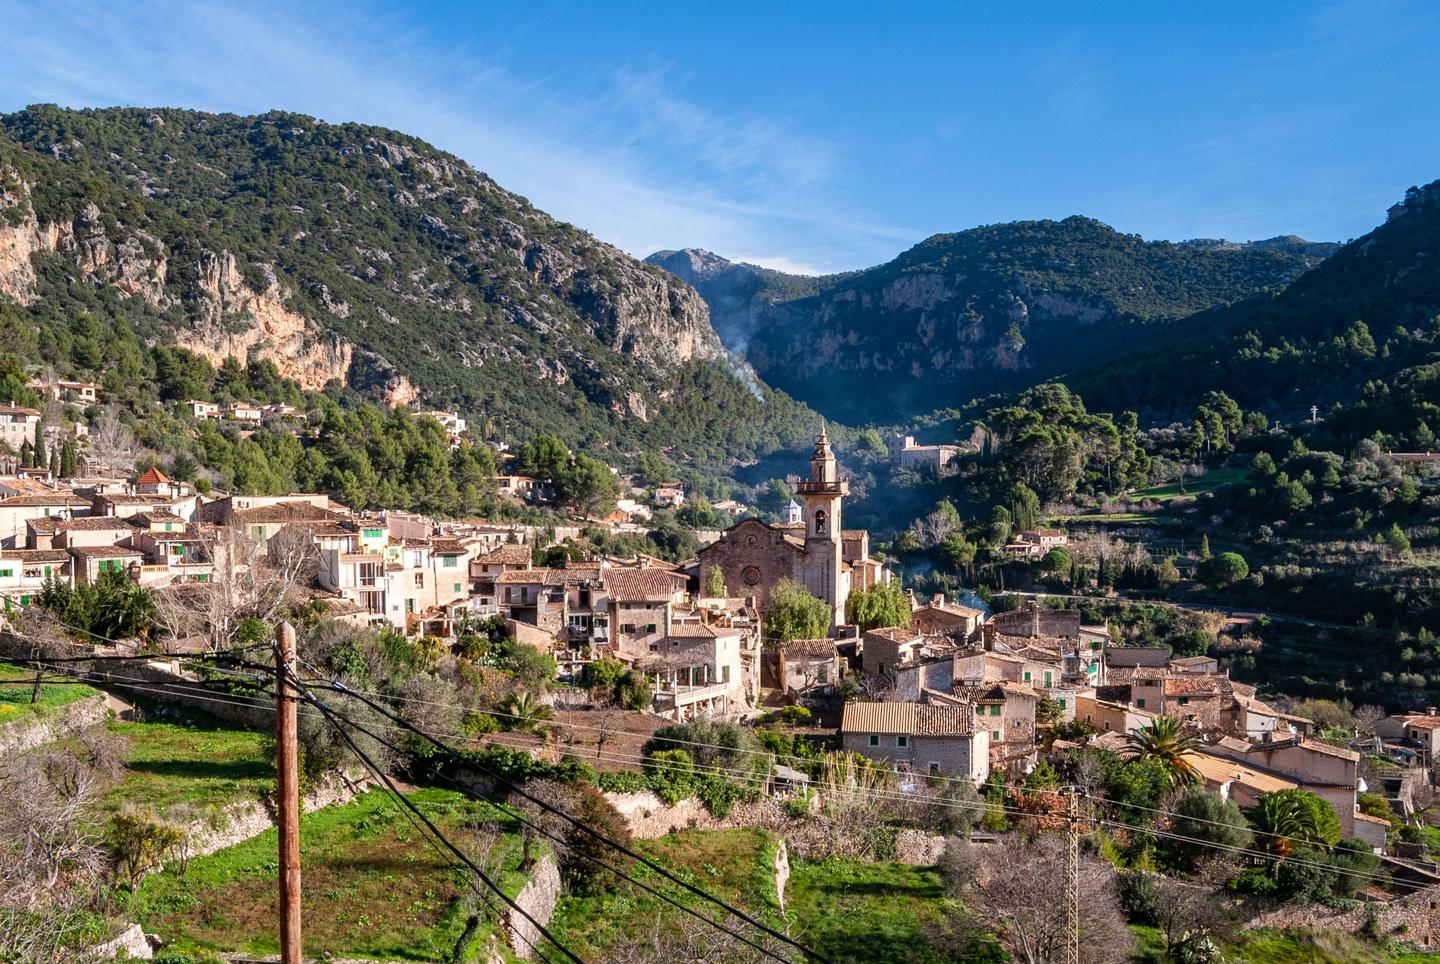 Panoramic view of a quaint village nestled in the lush green mountains of Mallorca, featuring traditional stone houses and a prominent church tower under a clear blue sky.